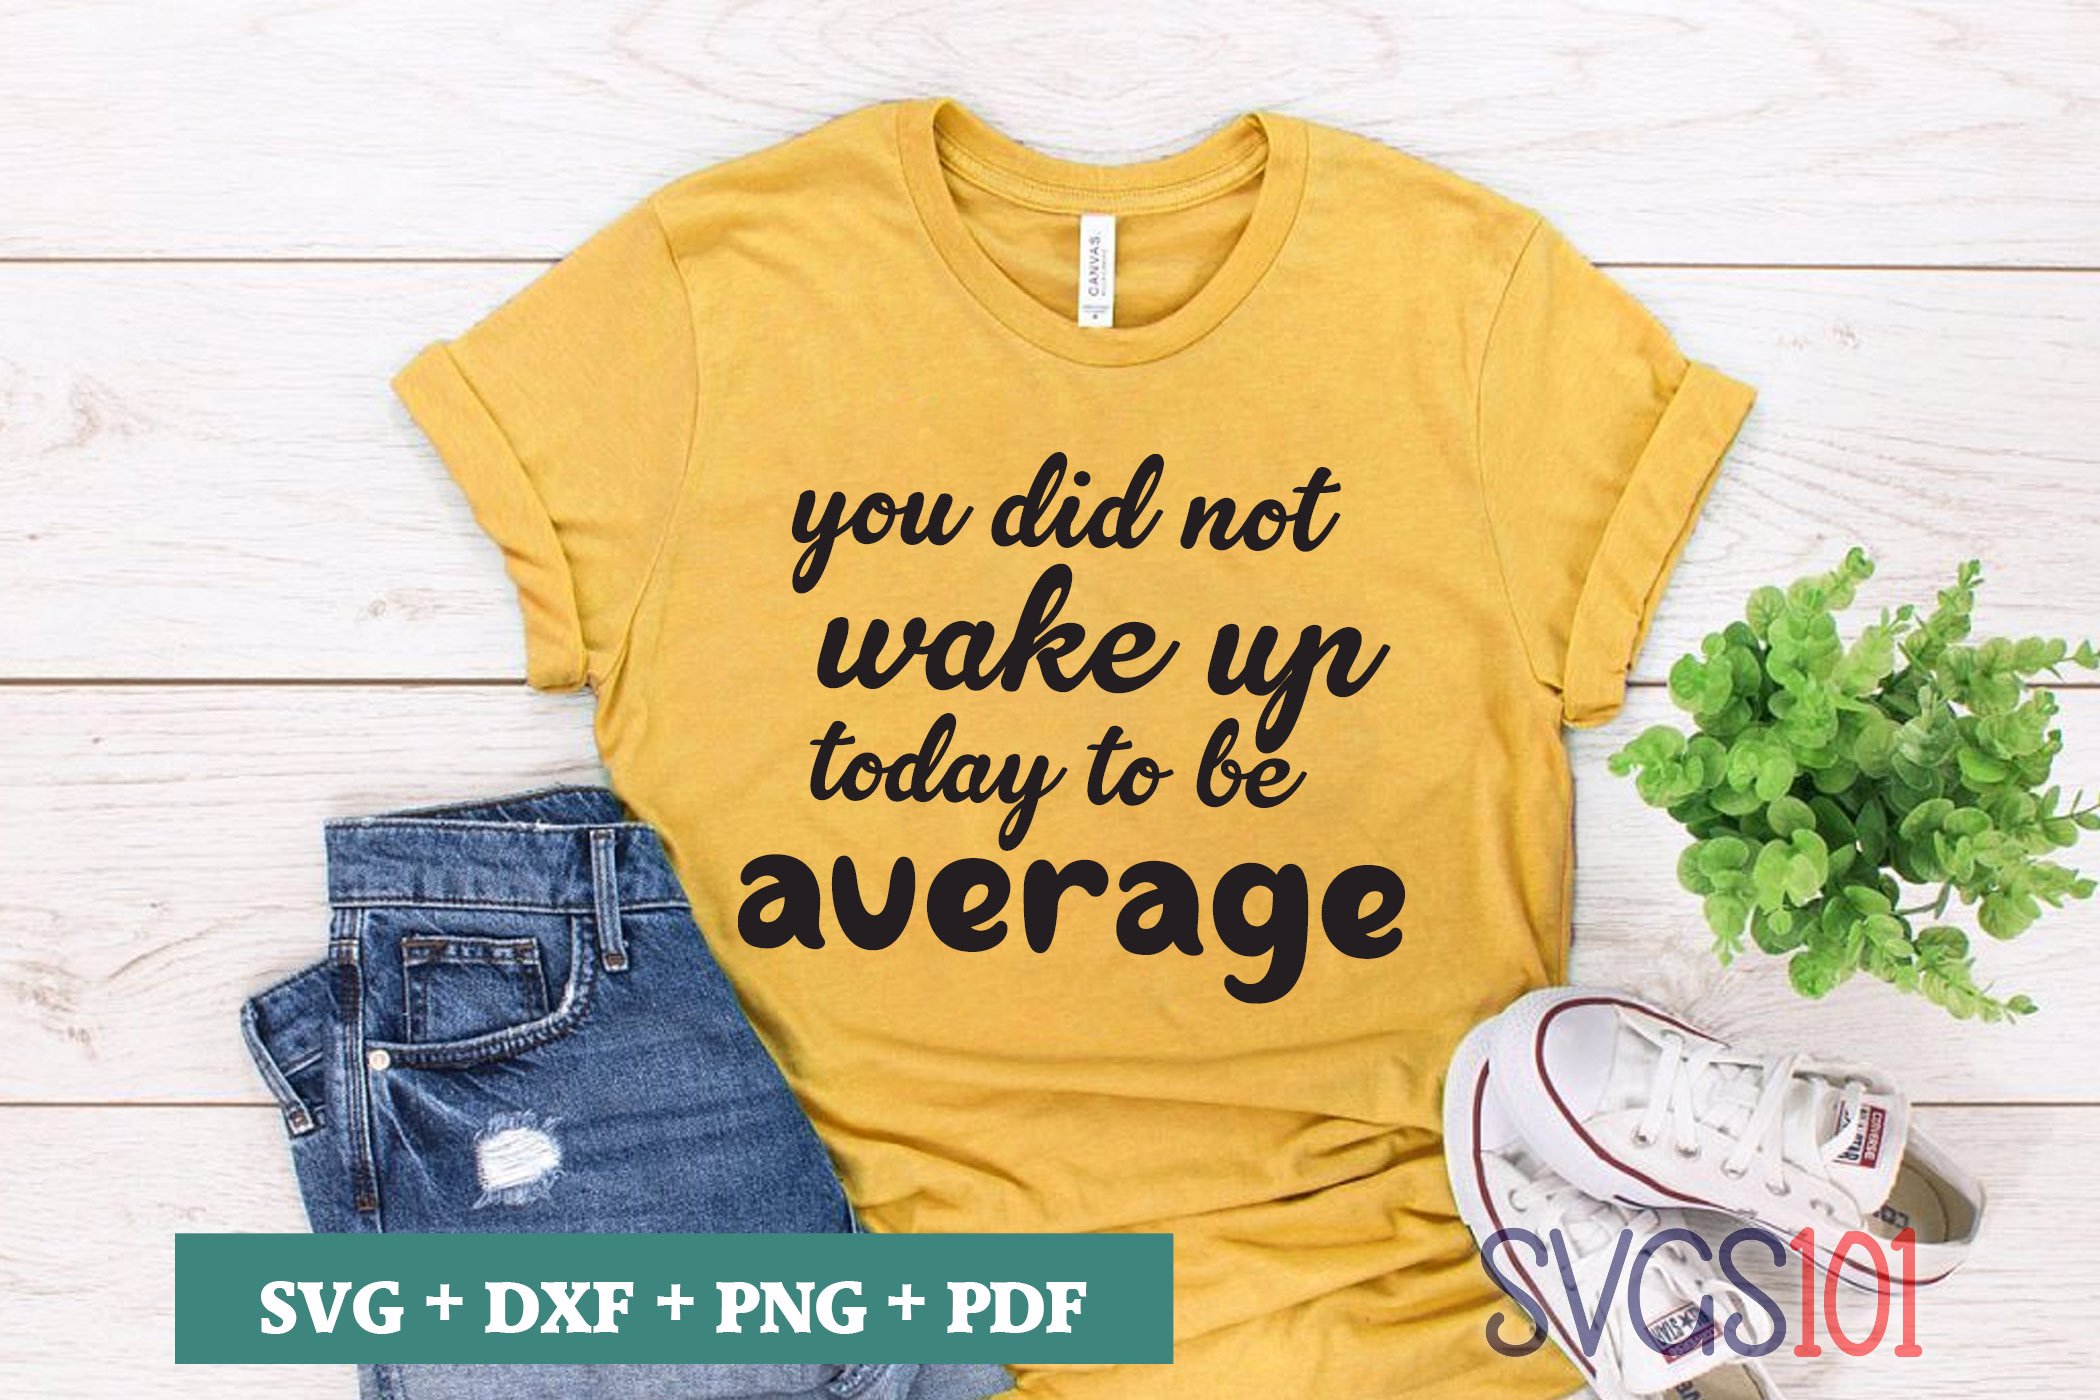 You did not wake up today to be average